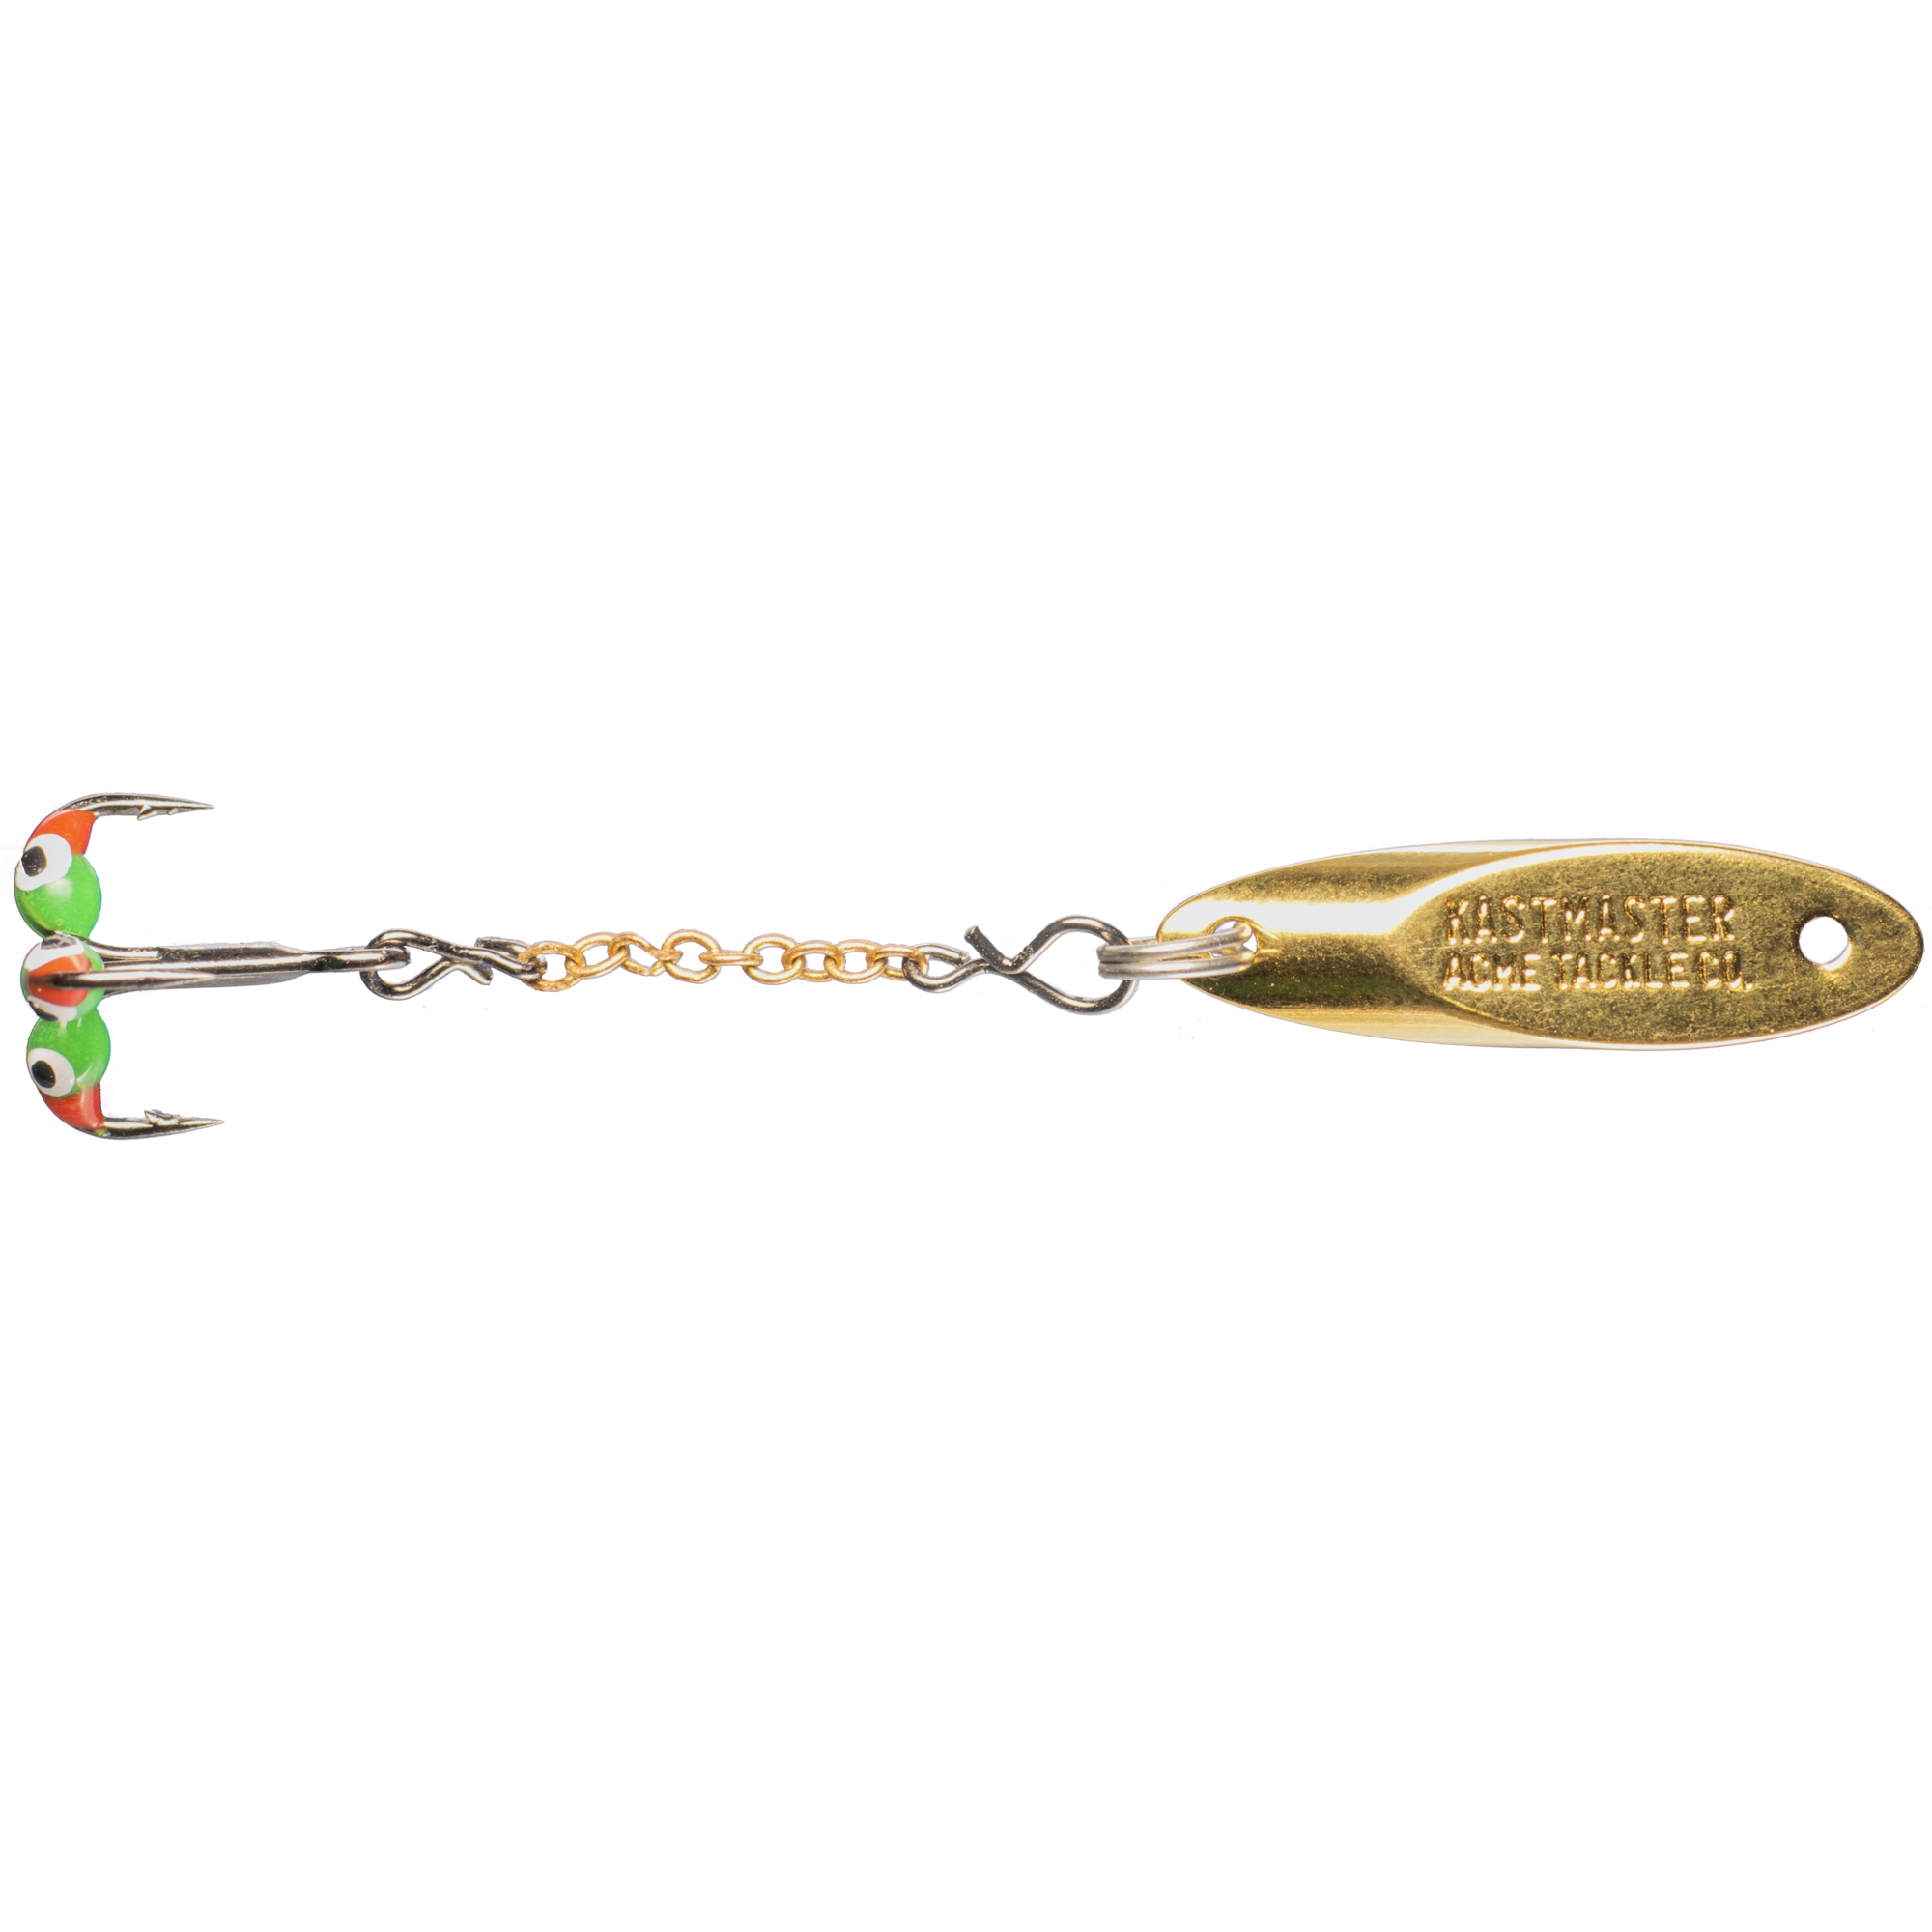 Acme Kastmaster Lure with Buck Tail Teaser, Gold, Nepal